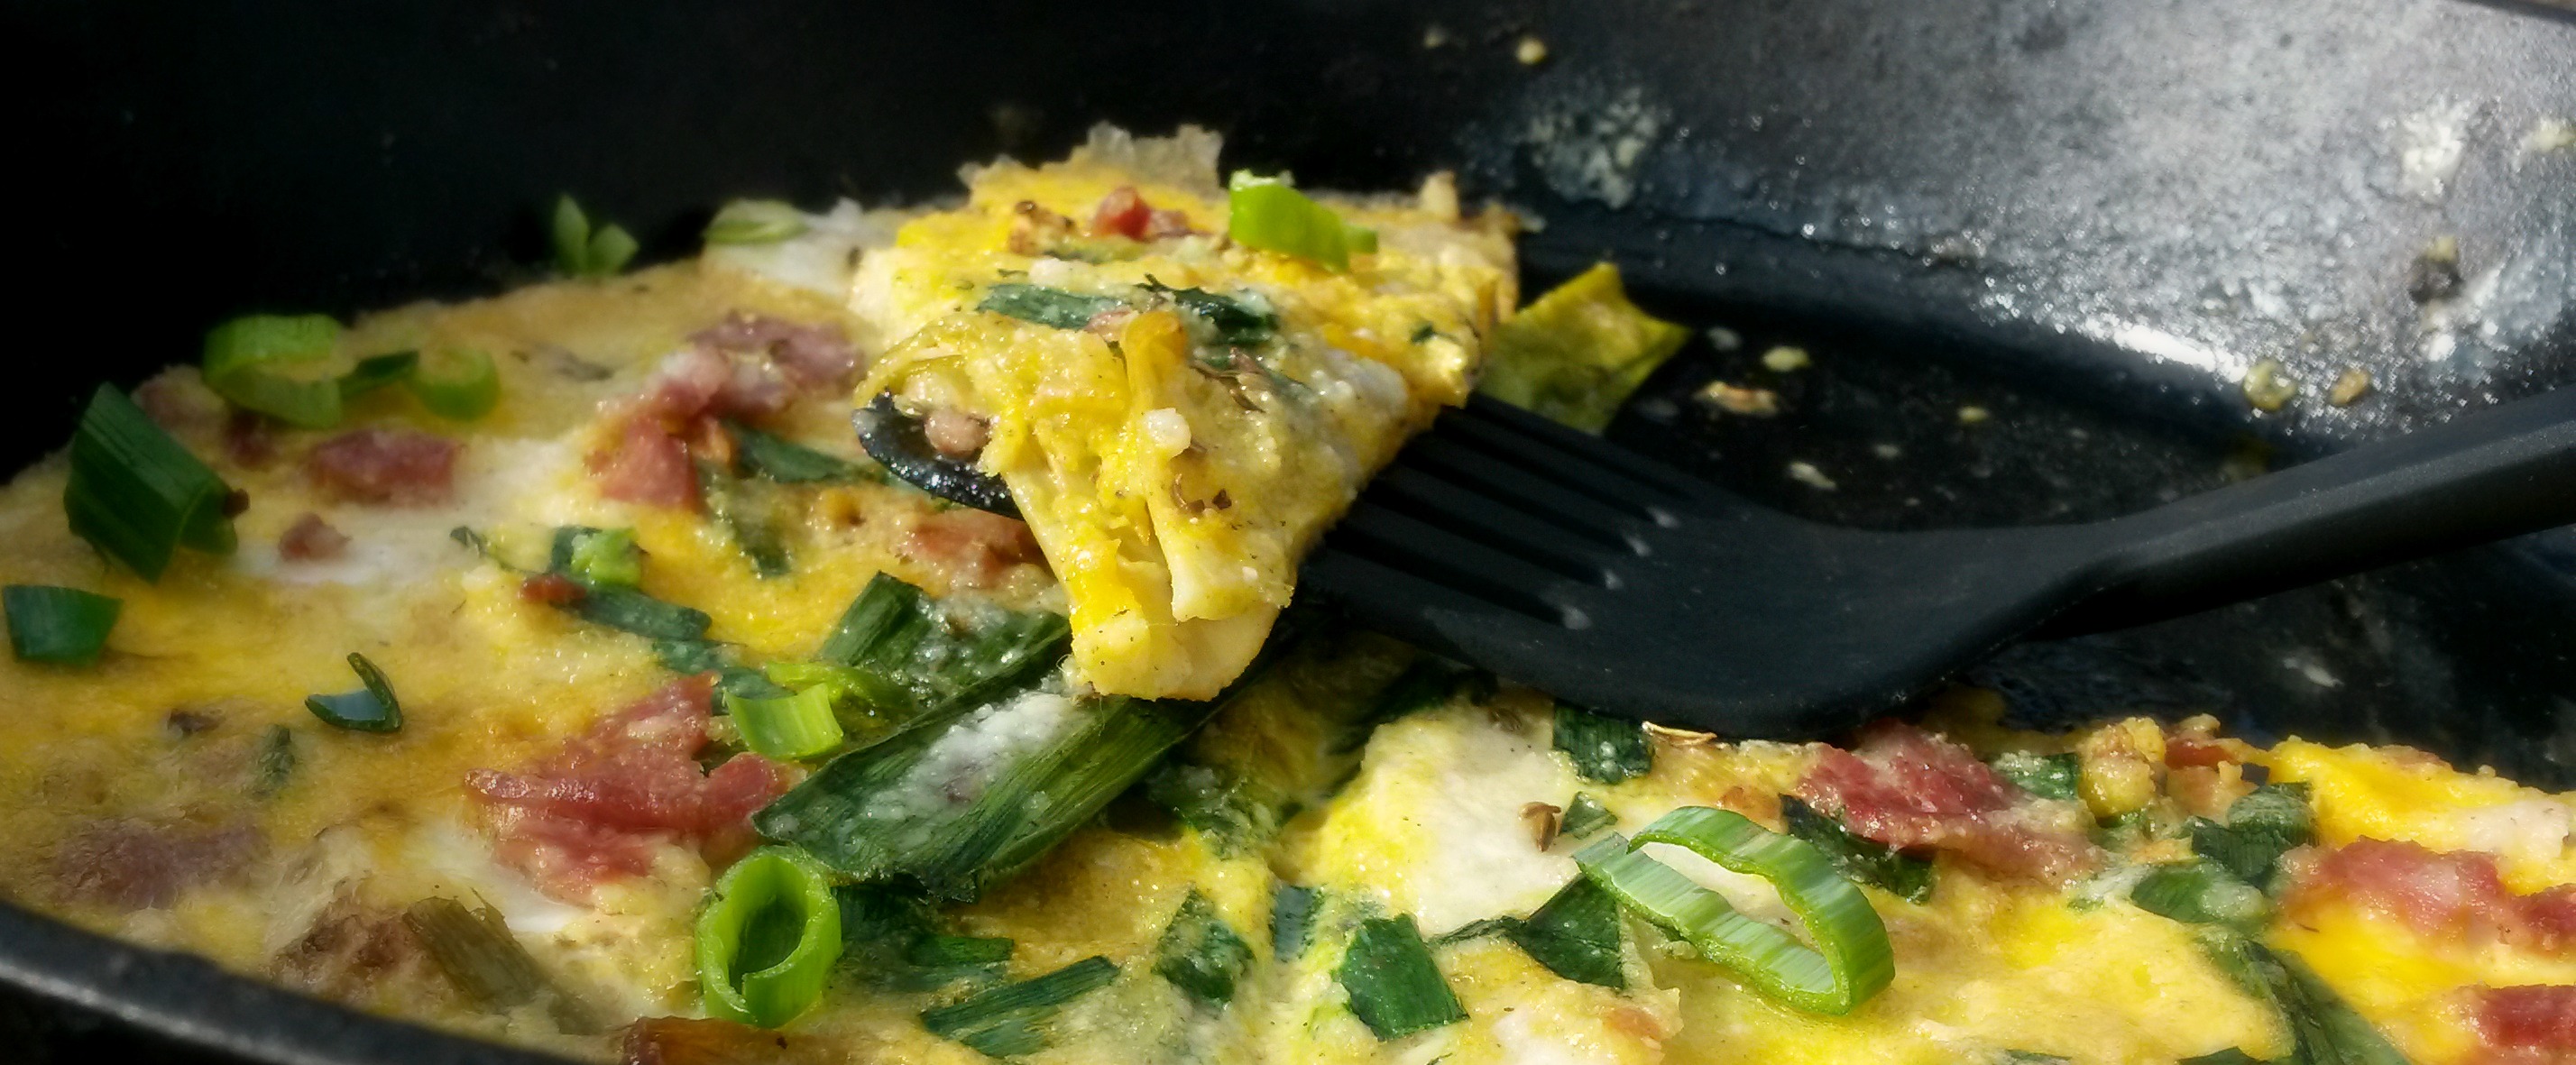 Bacon and Egg Skillet MLM